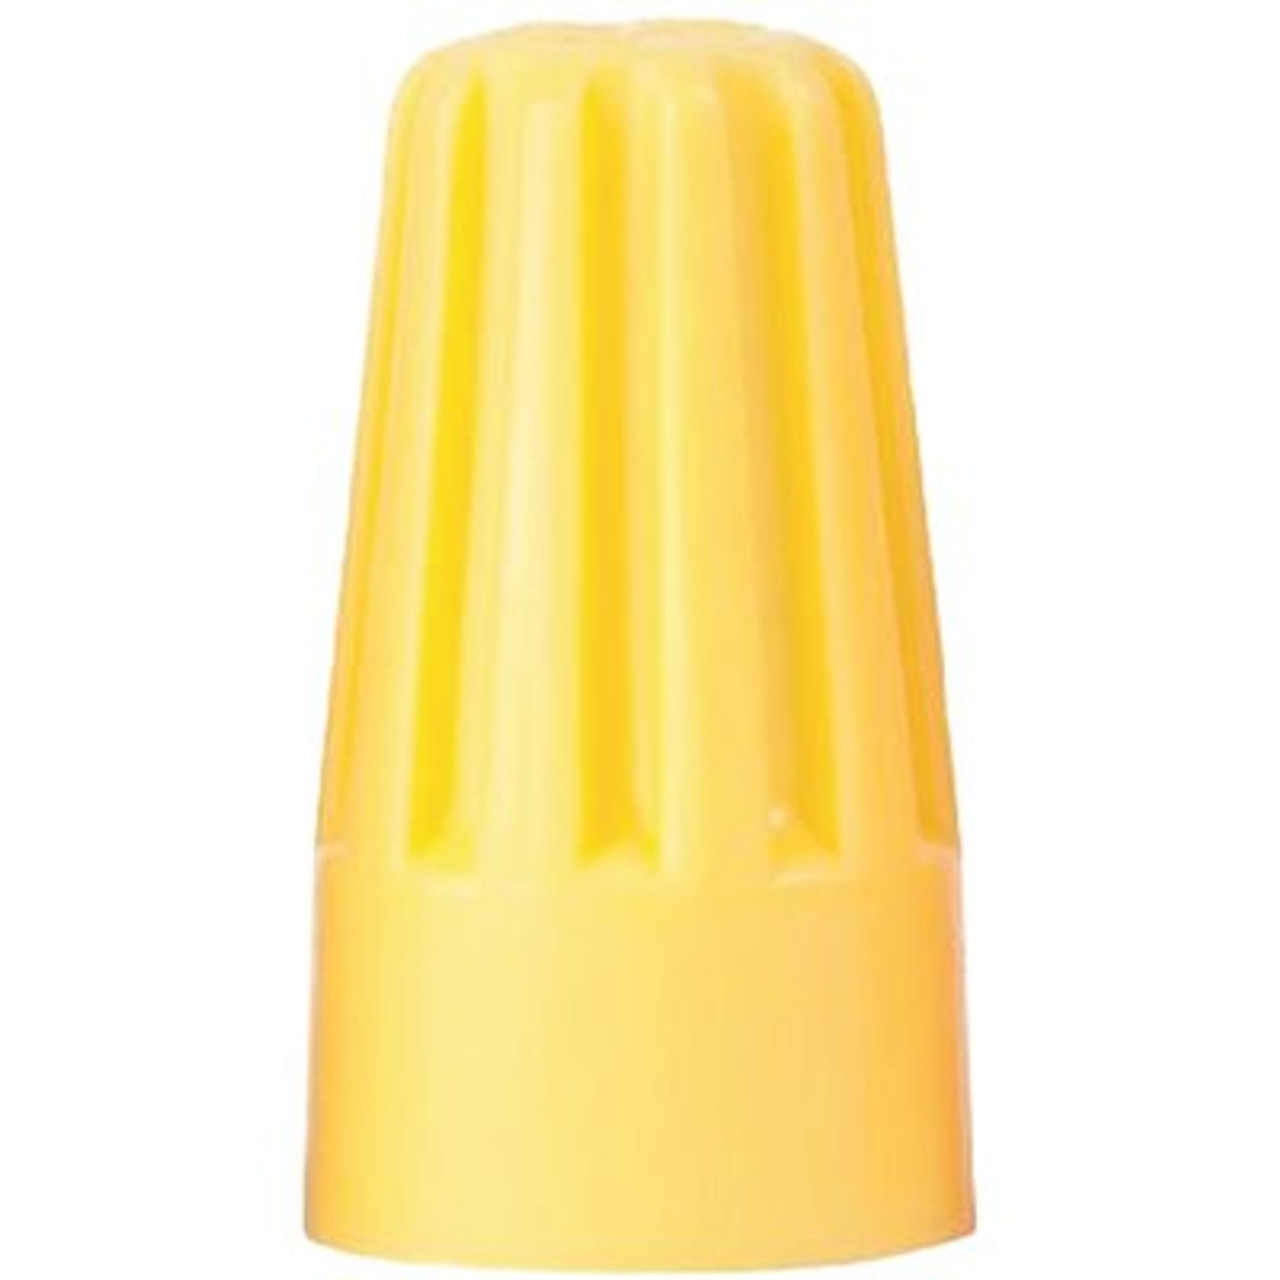 Commercial Electric Standard Wire Connectors In Yellow (500-Pack)